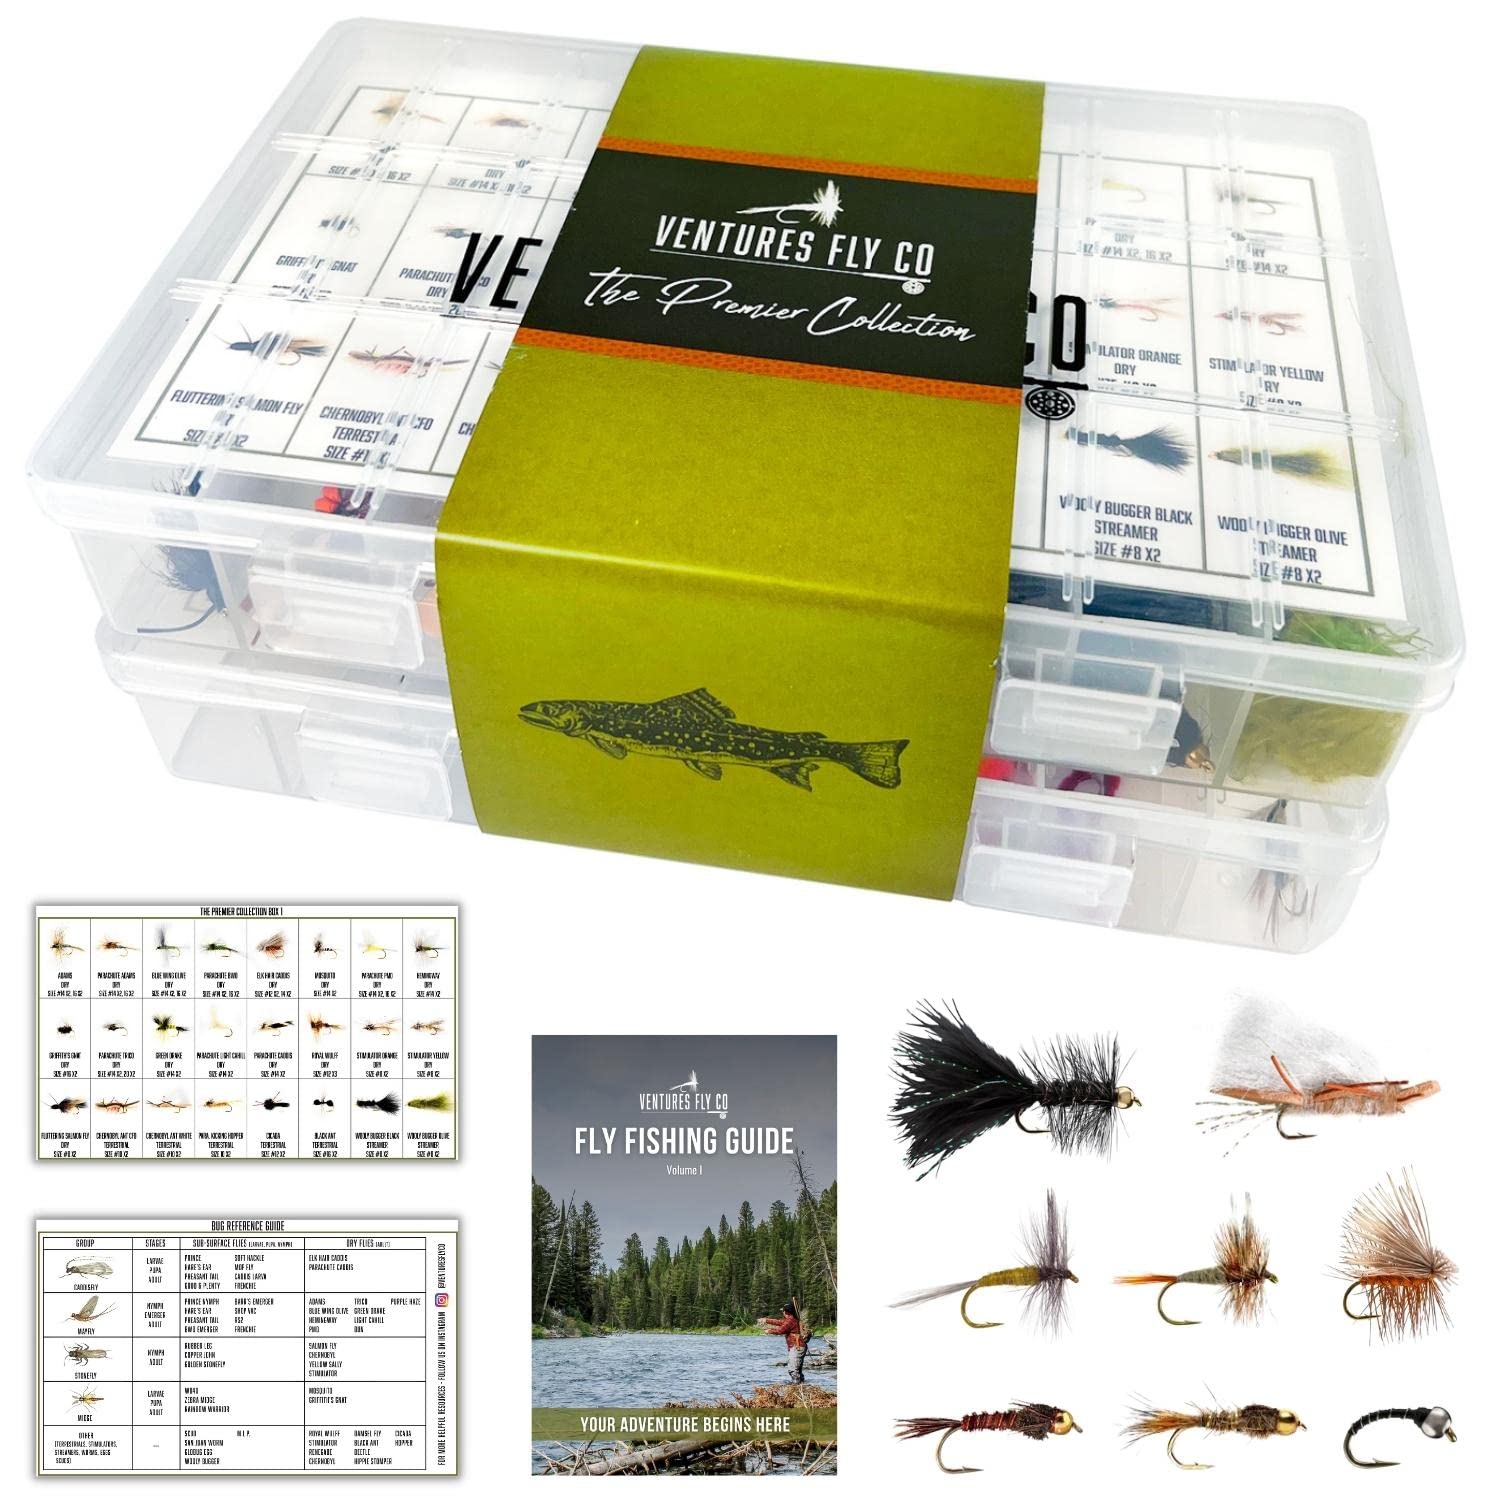 Ventures Fly co 122 Premium Hand Tied Fly Fishing Flies Assortment Two Fly Boxes Included Dry, Wet, Nymphs, Streamers, Wooly Bug